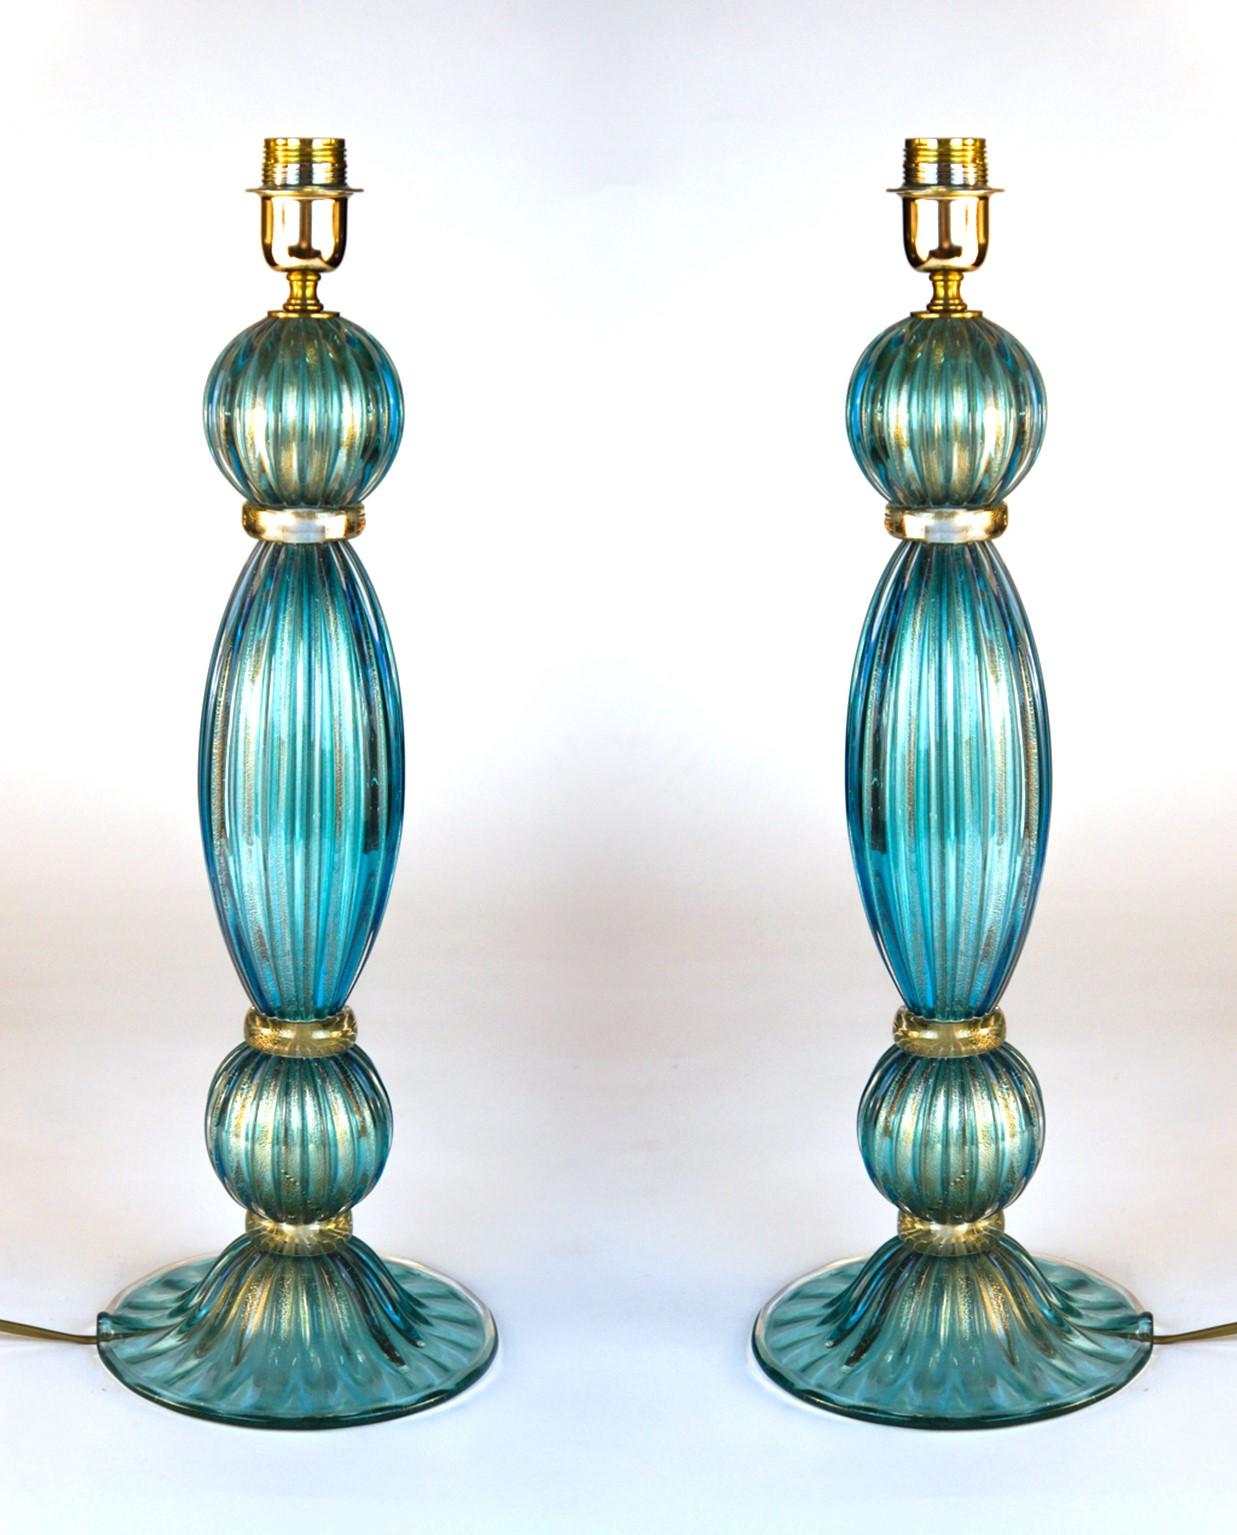 Exclusive pair of Murano glass table lamps aquamarine colour in 24 carat gold leaf. 
By touching the lamps, you can hear the various grooves made especially by the 